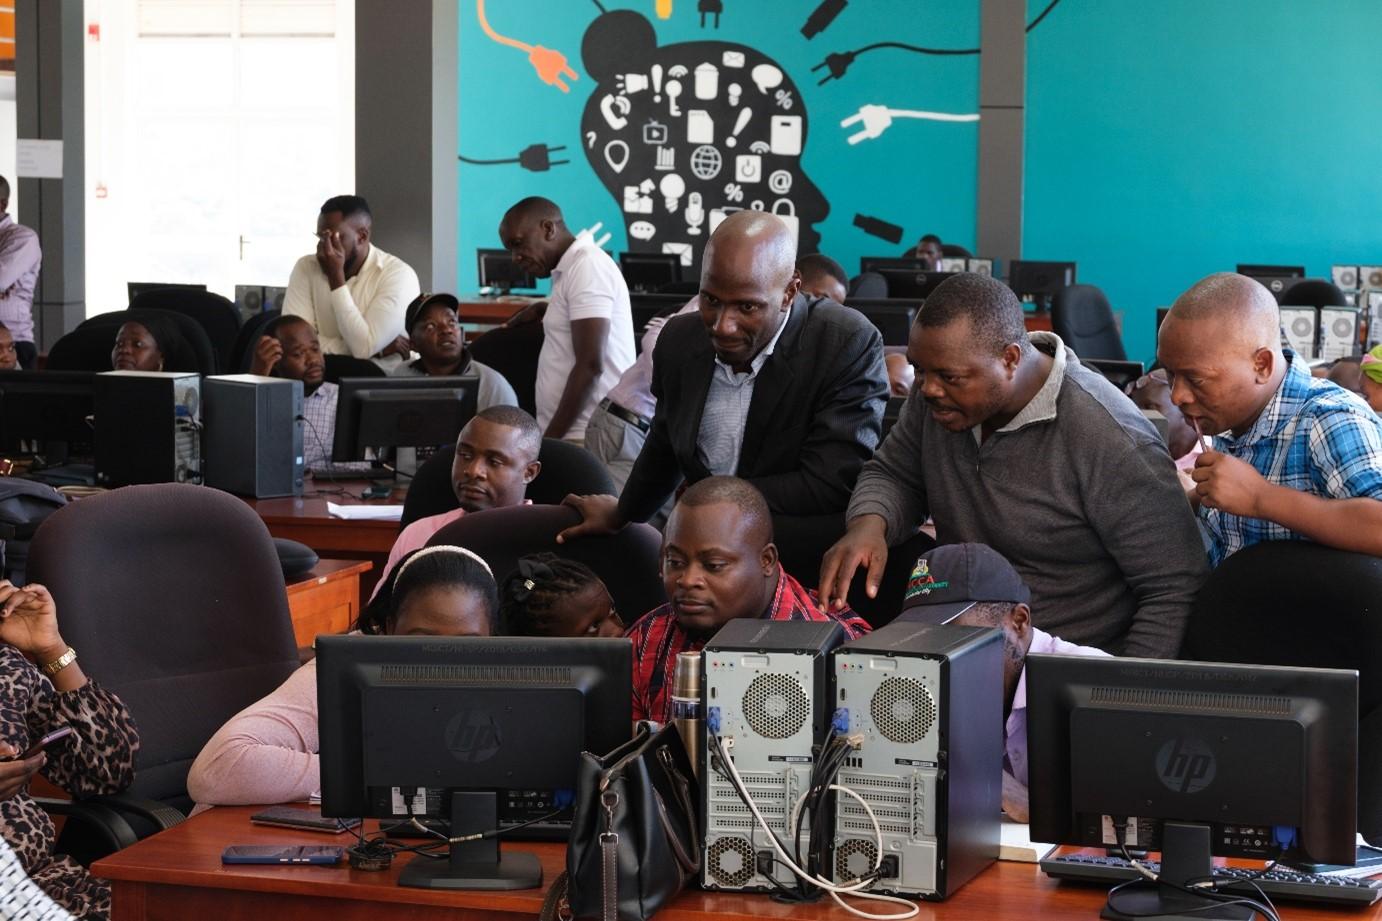 With the support of Team Europe, Uganda moves forward on its digital transformation journey